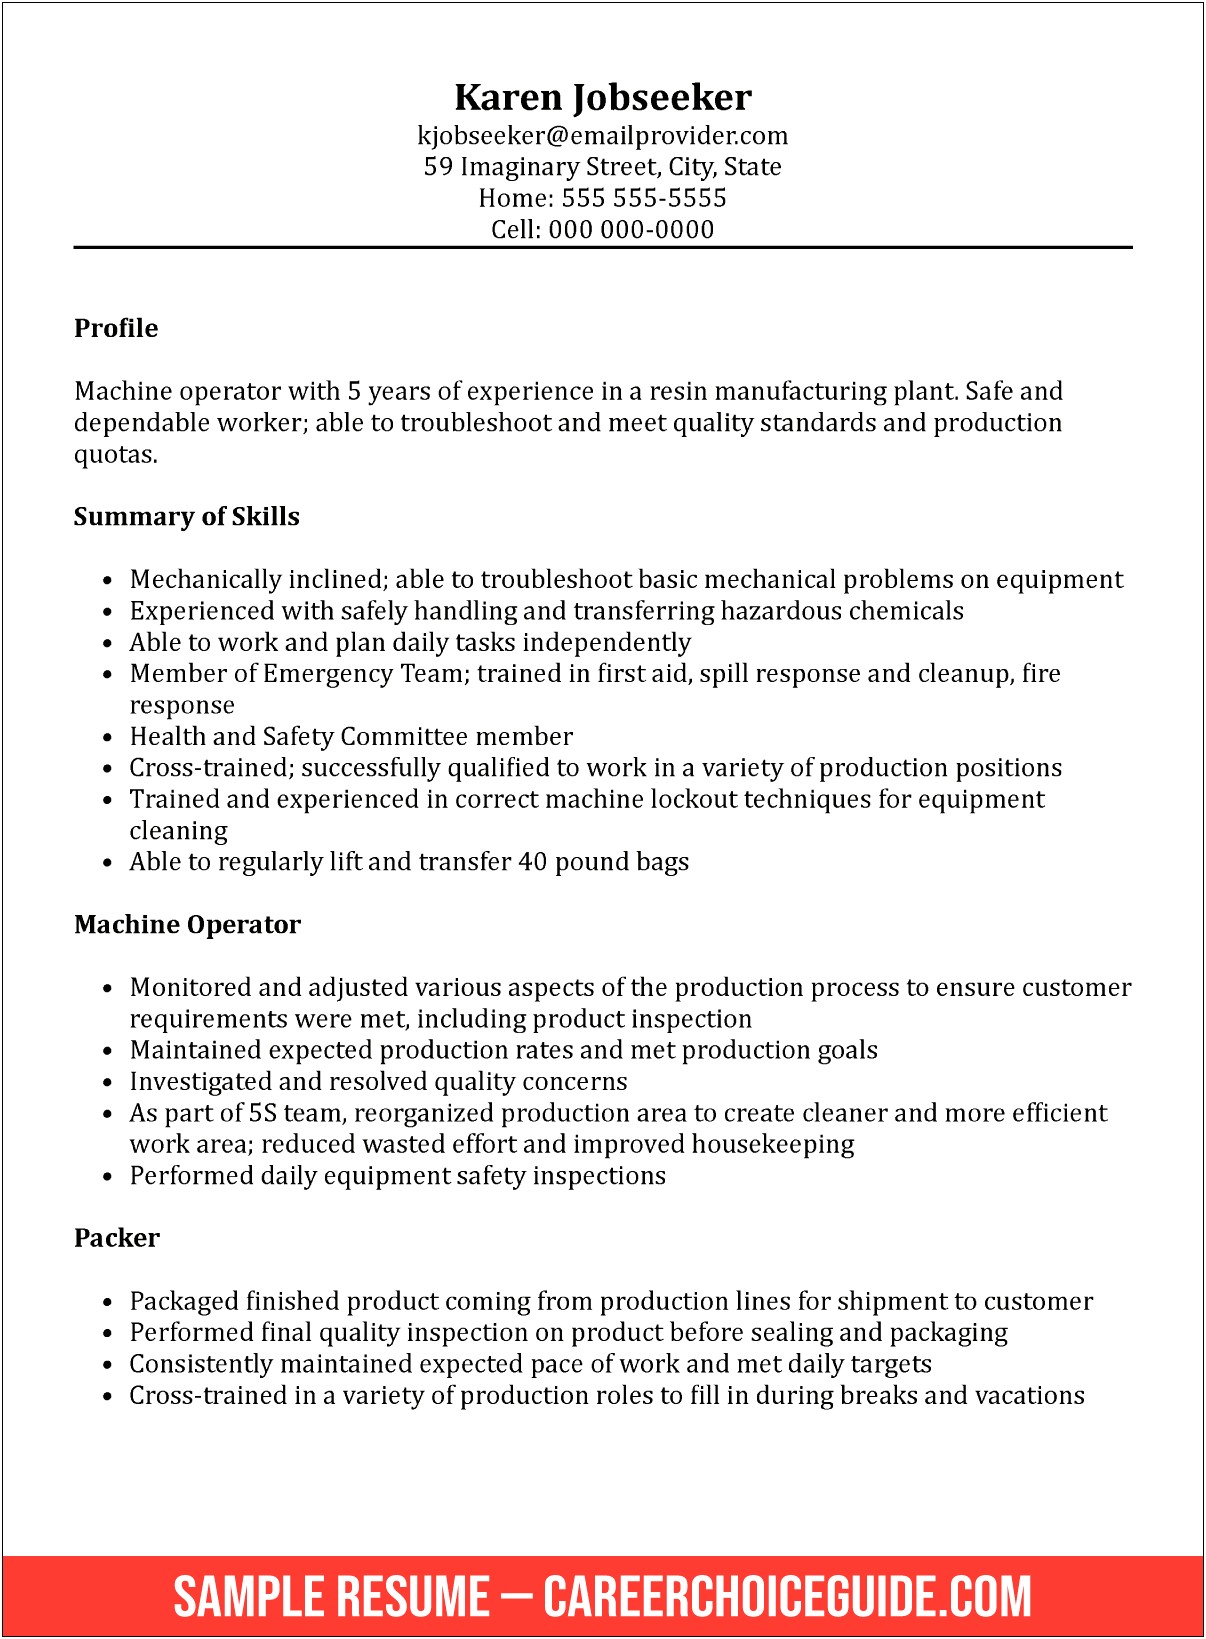 Skills To Use For A Resume Ideas